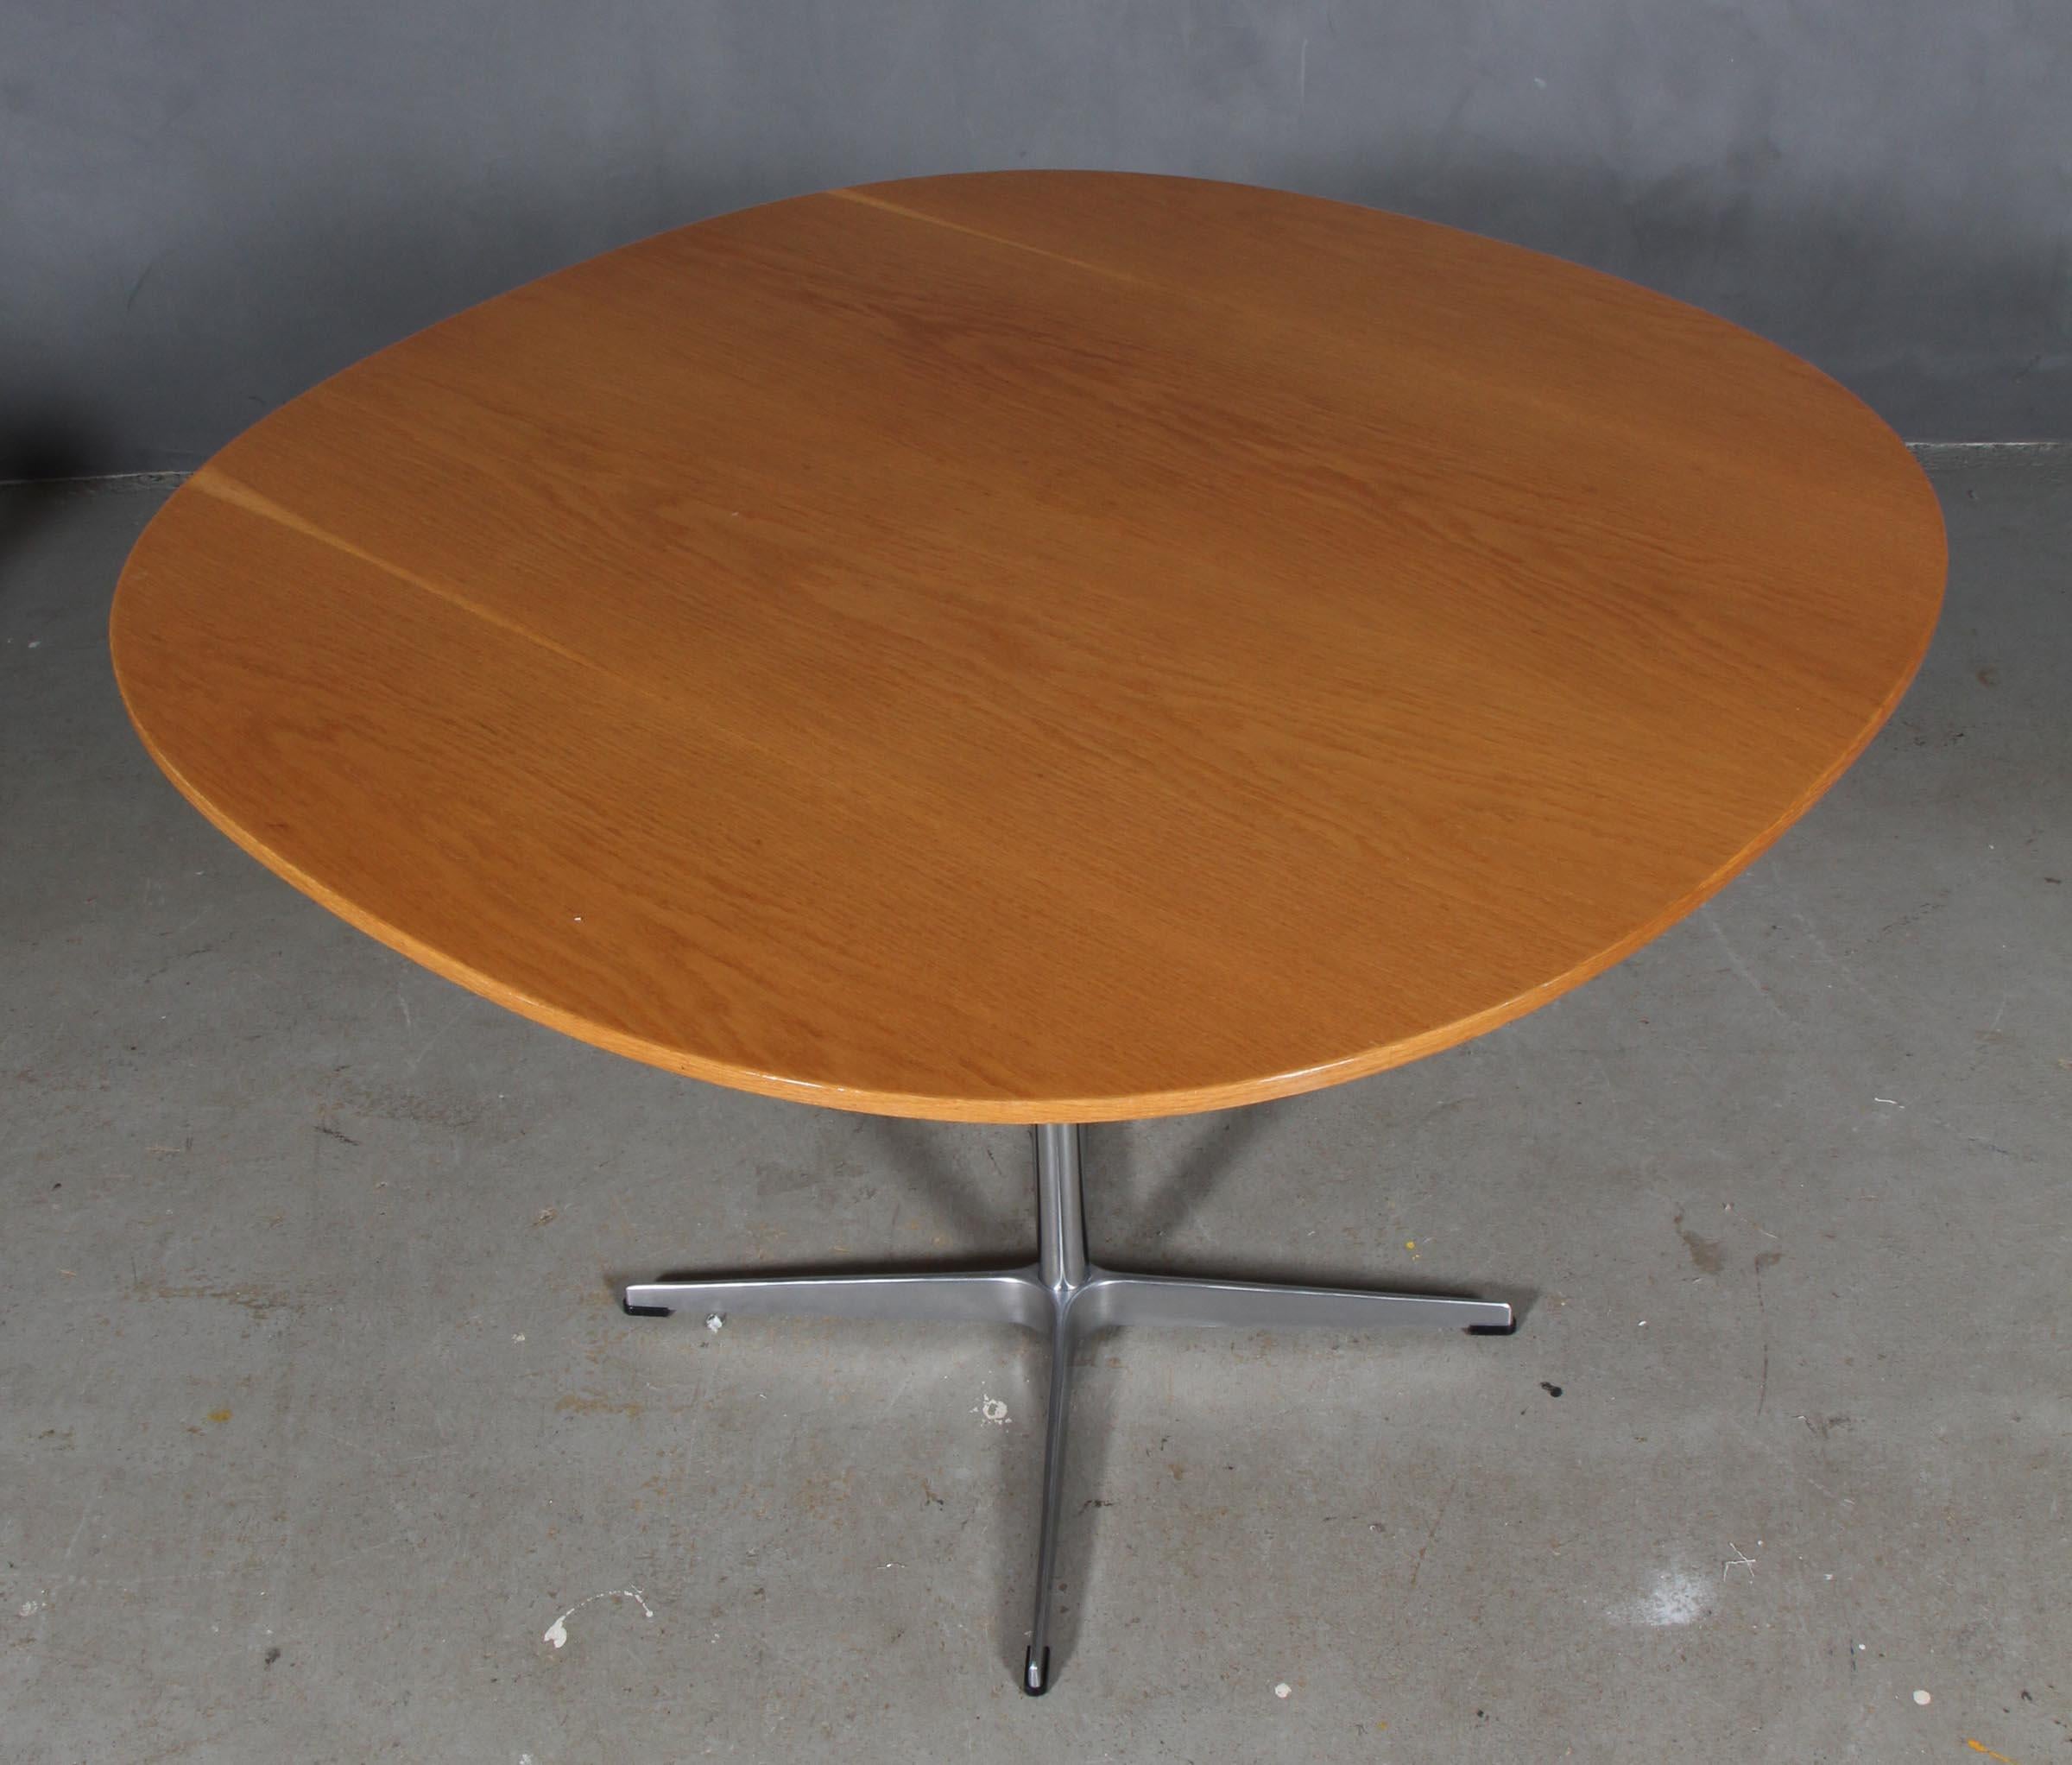 Piet Hein & Arne Jacobsen café table with plate of veneered oak.

Four star base of aluminium and steel.

Made by Fritz Hansen.